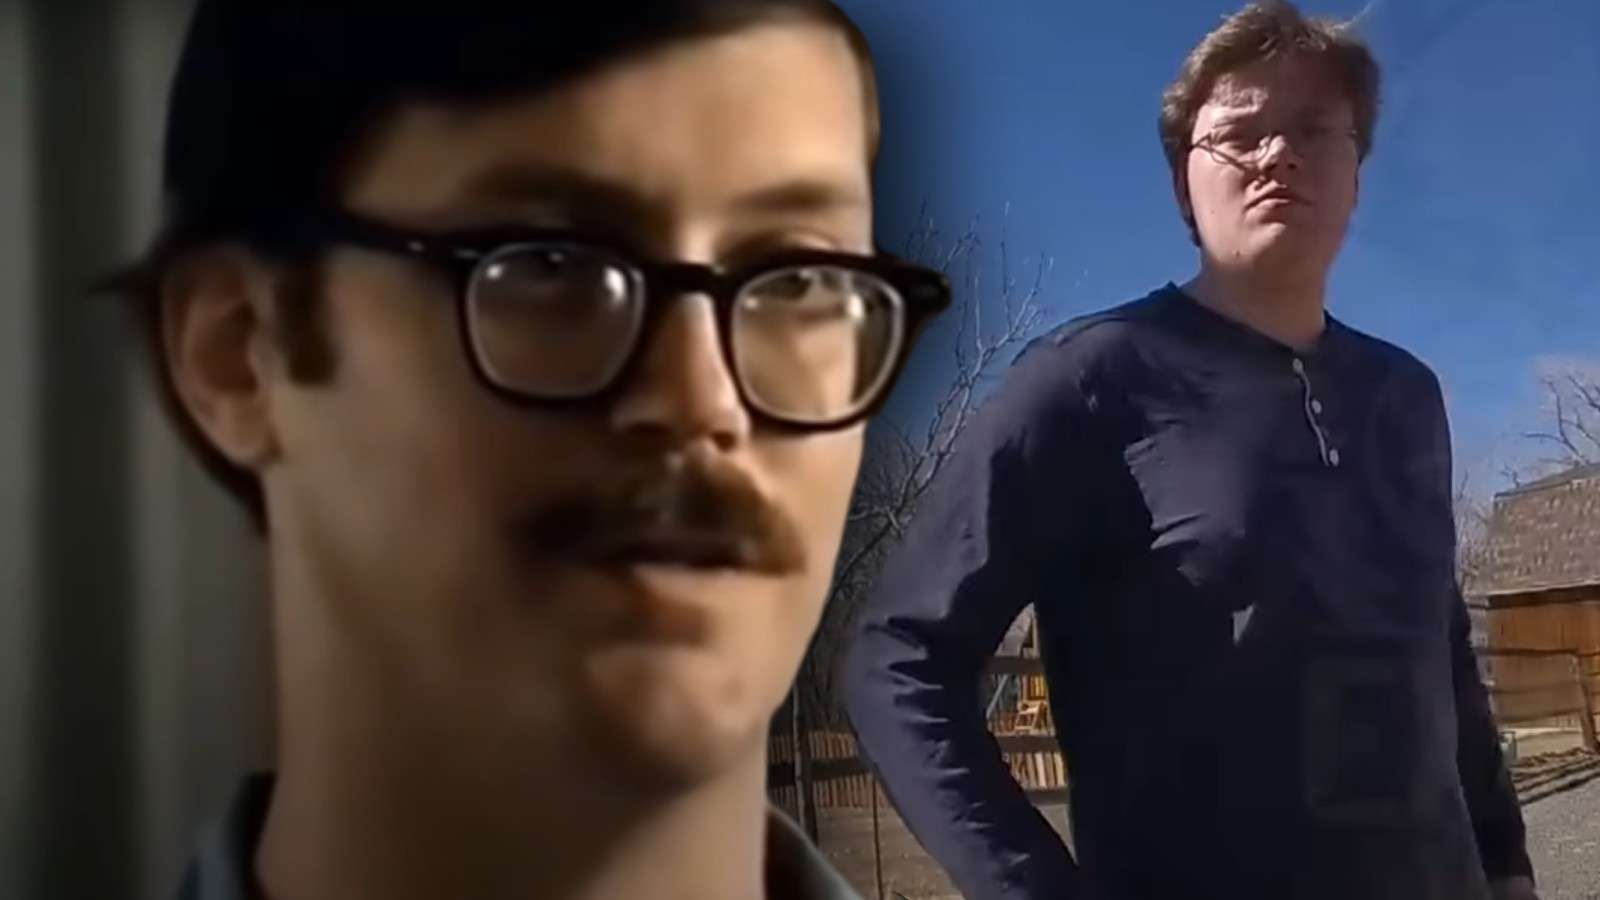 Image of Edmund Kemper 1984 interview and police cam footage of Brian Cohee